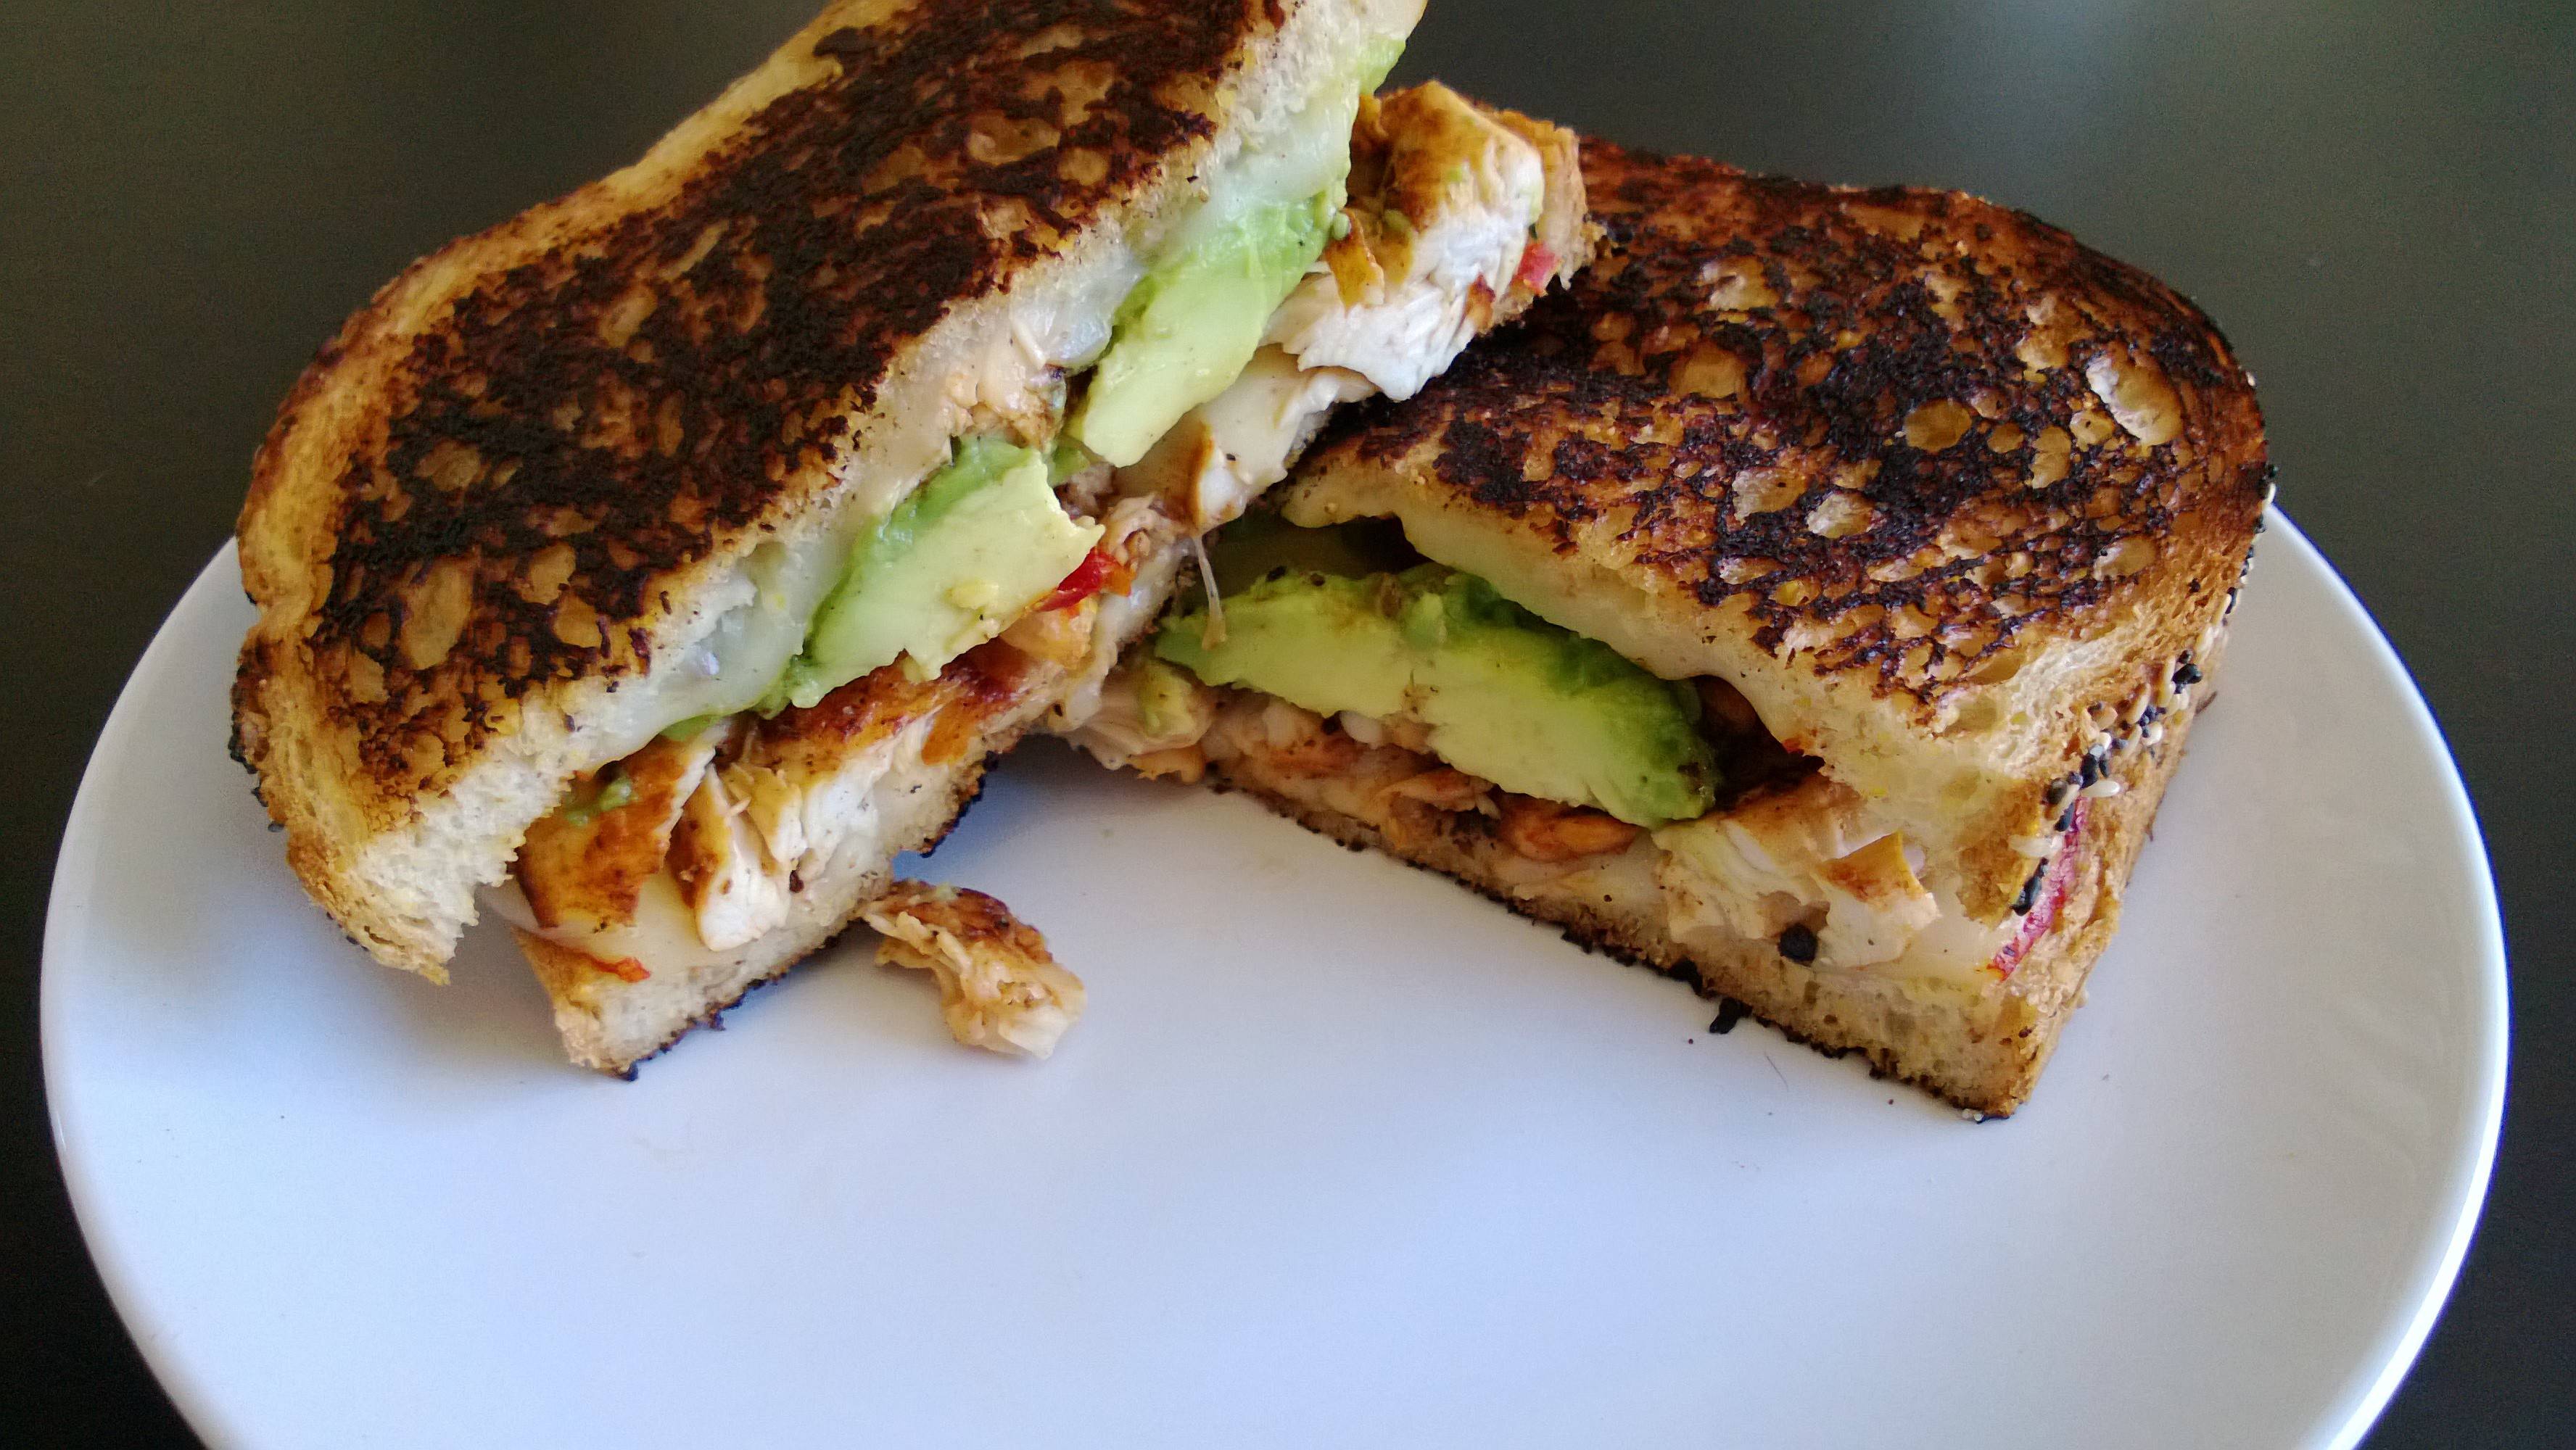 Cayenne chicken, muenster cheese, avocado, sundried tomatoes